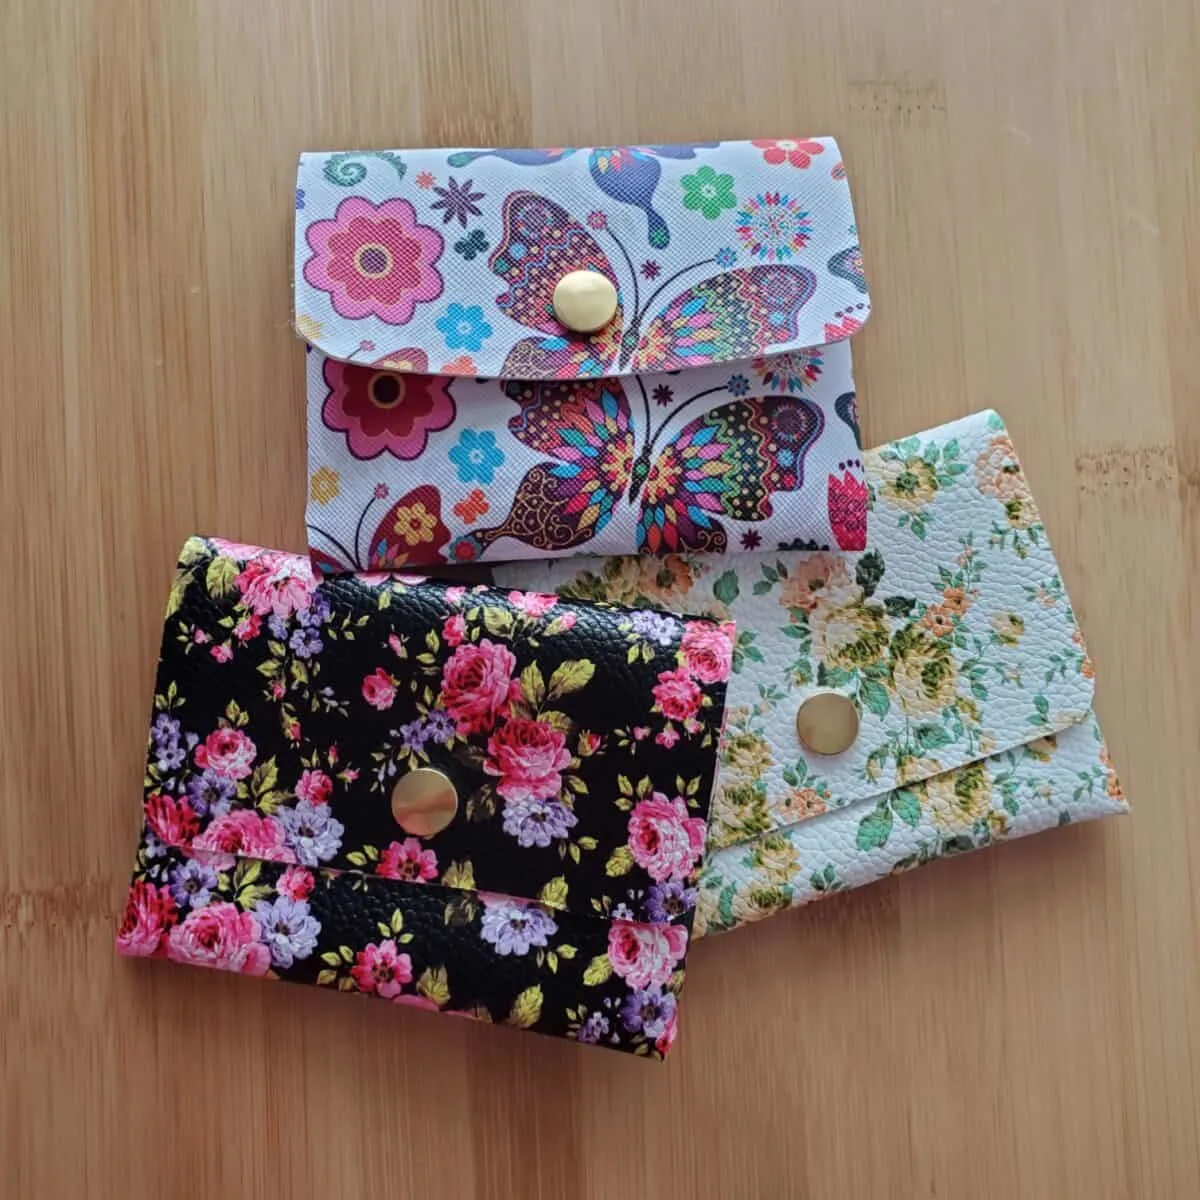 Princess Inspired Mini Square Messenger Bag With Silver Beads And Childrens Coin  Purse For Girls And Kids From Angelgirlshe111, $6.33 | DHgate.Com